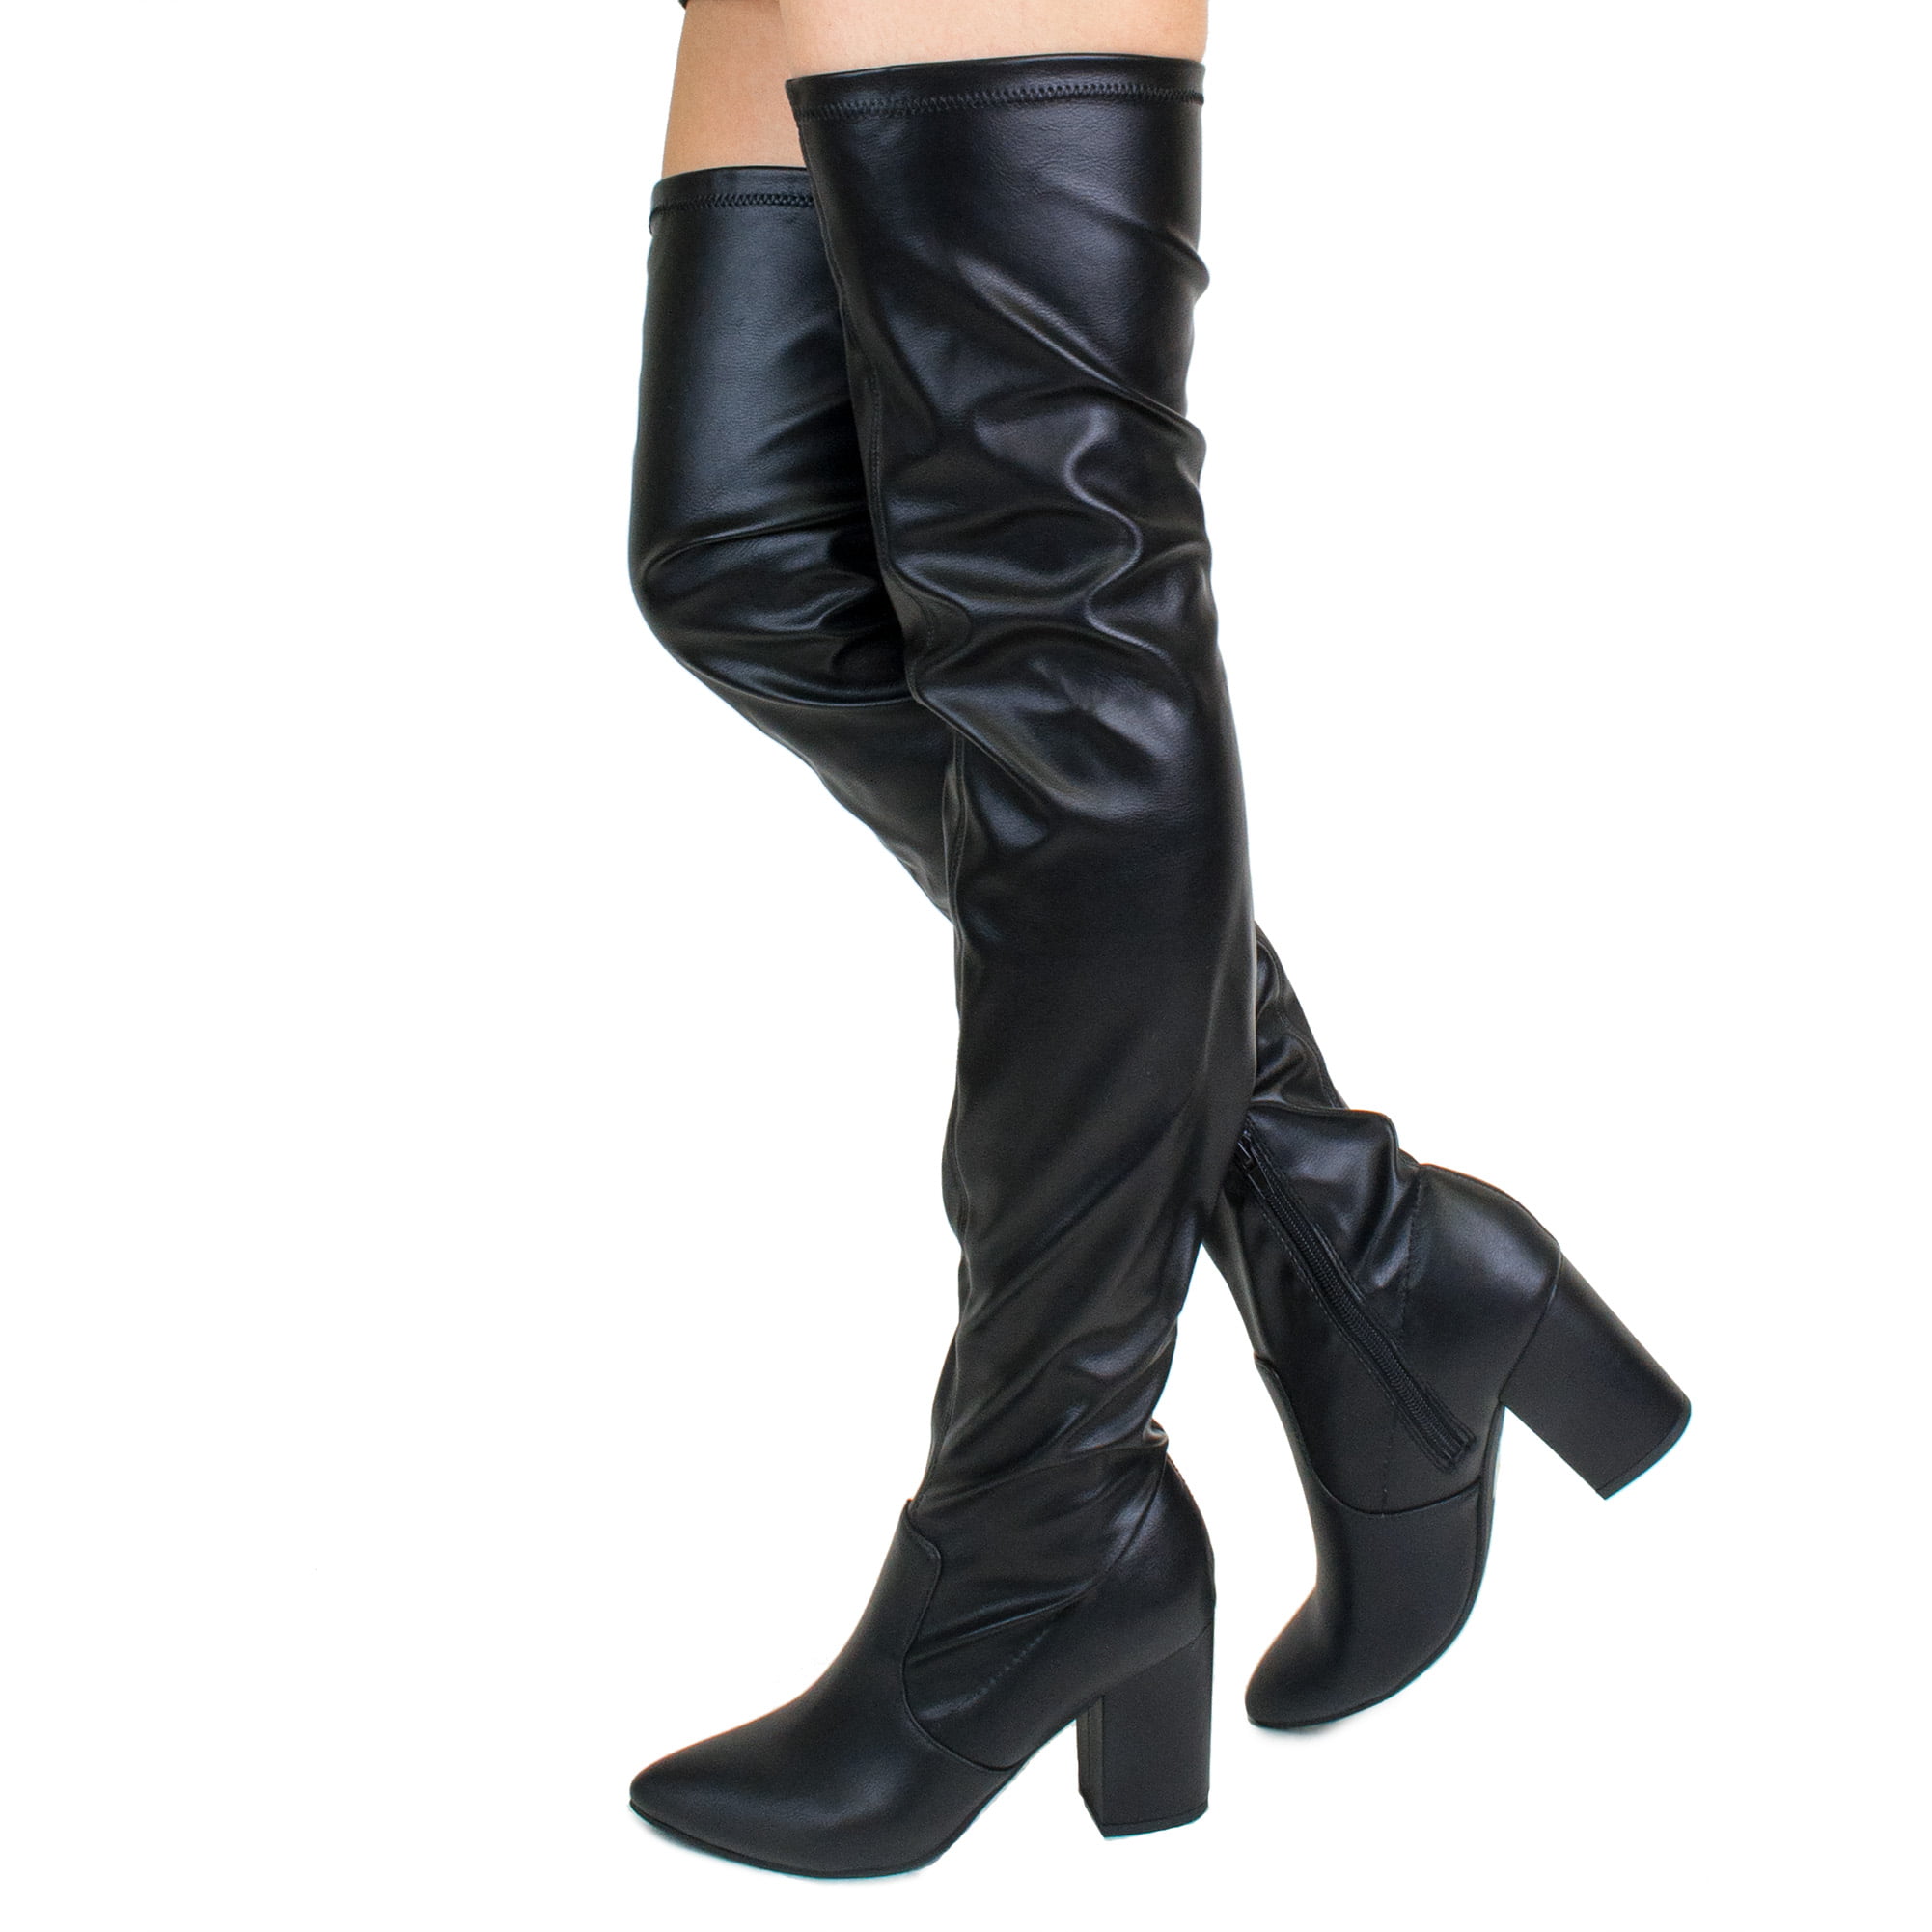 WOMENS LADIES LOW HEEL THIGH HIGH OVER THE KNEE STRETCH RIDING BOOTS SIZE 